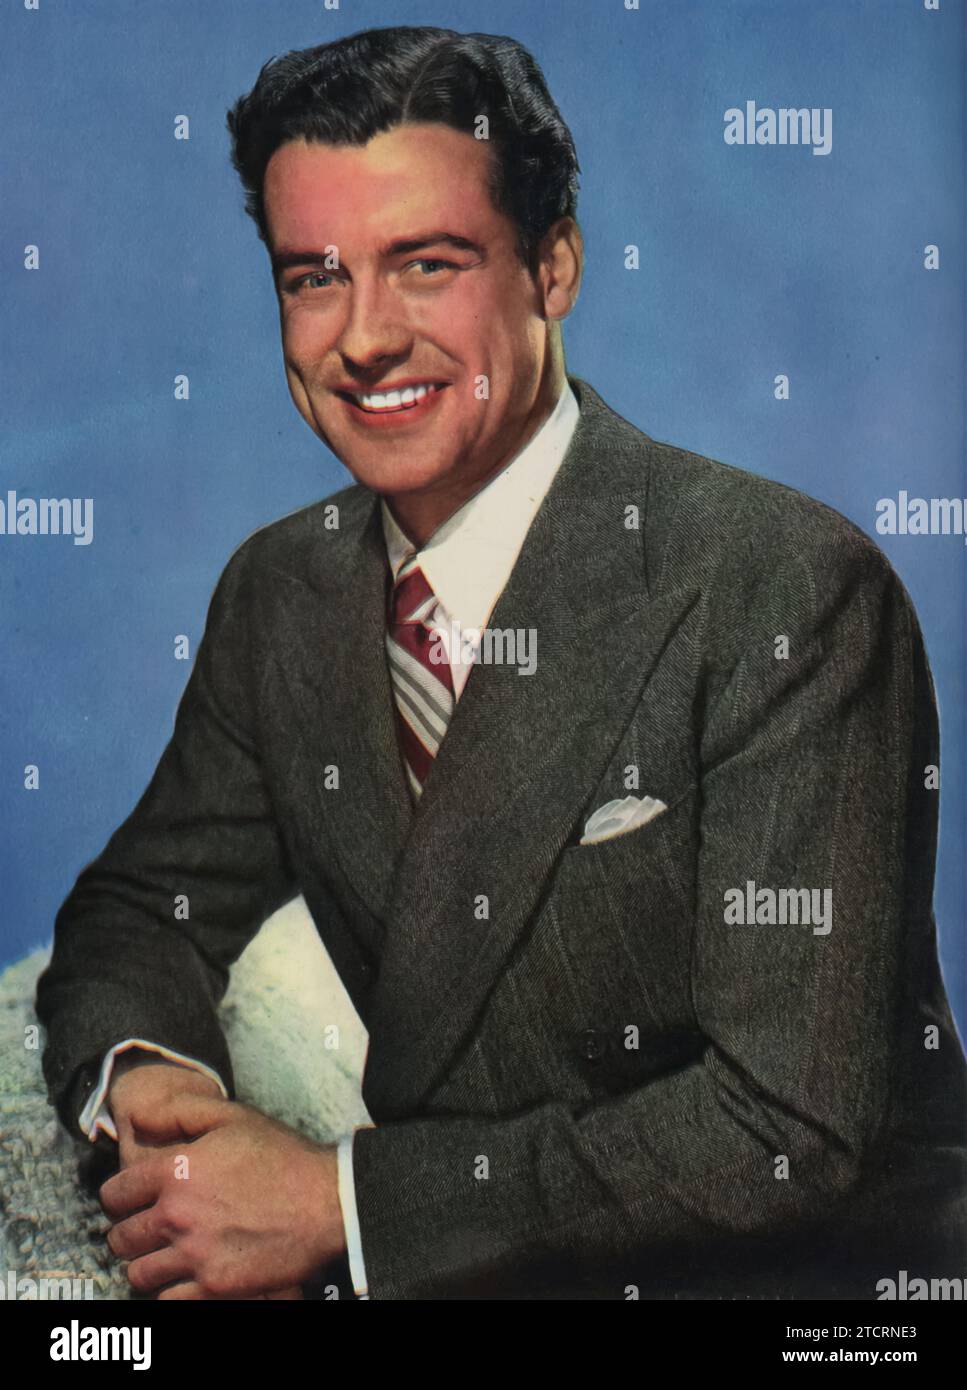 Portrait of Richard Greene, a notable actor known for his dashing roles during the 1940s and 1950s. Born on 25th August 1918, and passing away on 1st June 1985, Greene's charm and acting prowess made him a favorite among audiences. He is perhaps best remembered for his iconic portrayal in the television series 'The Adventures of Robin Hood'. Stock Photo